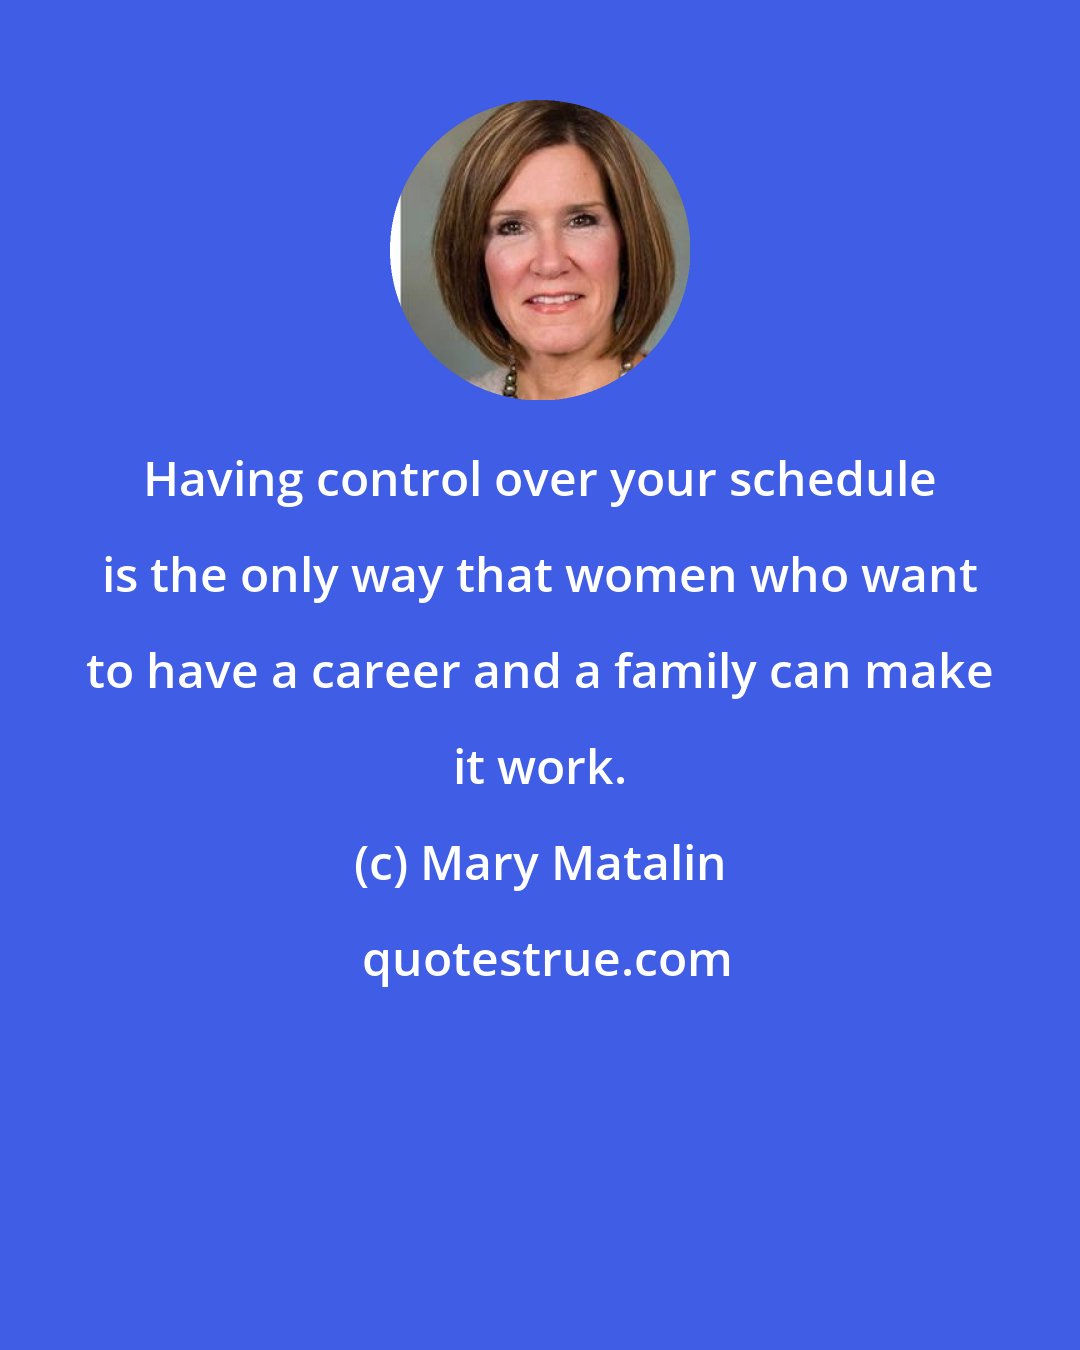 Mary Matalin: Having control over your schedule is the only way that women who want to have a career and a family can make it work.